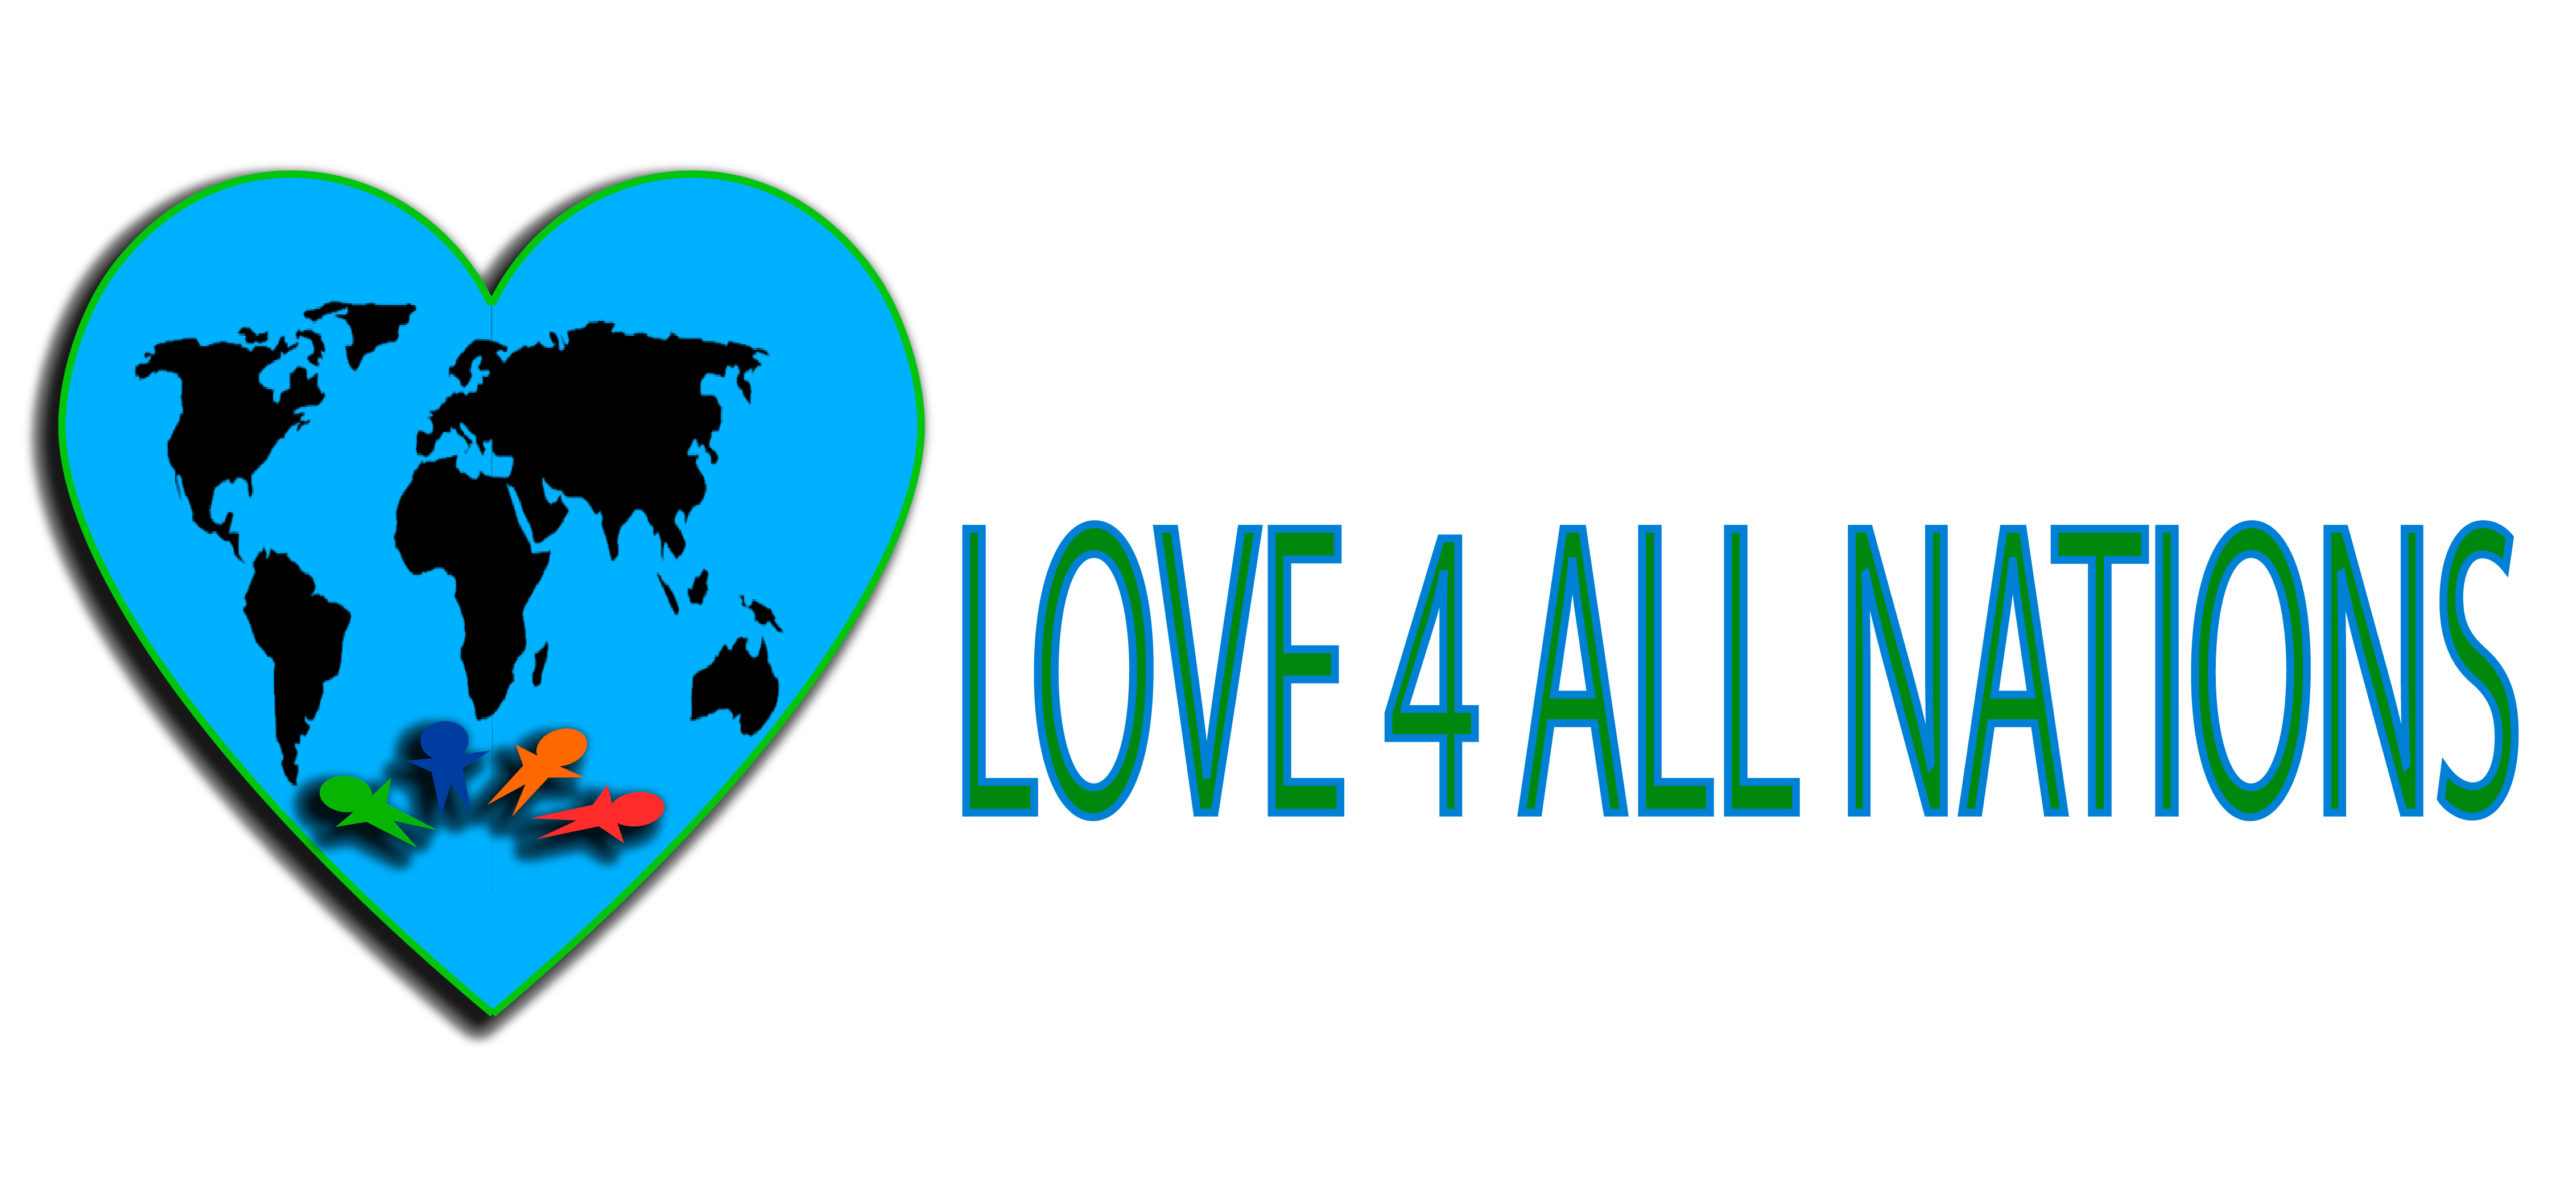 love 4 all nations